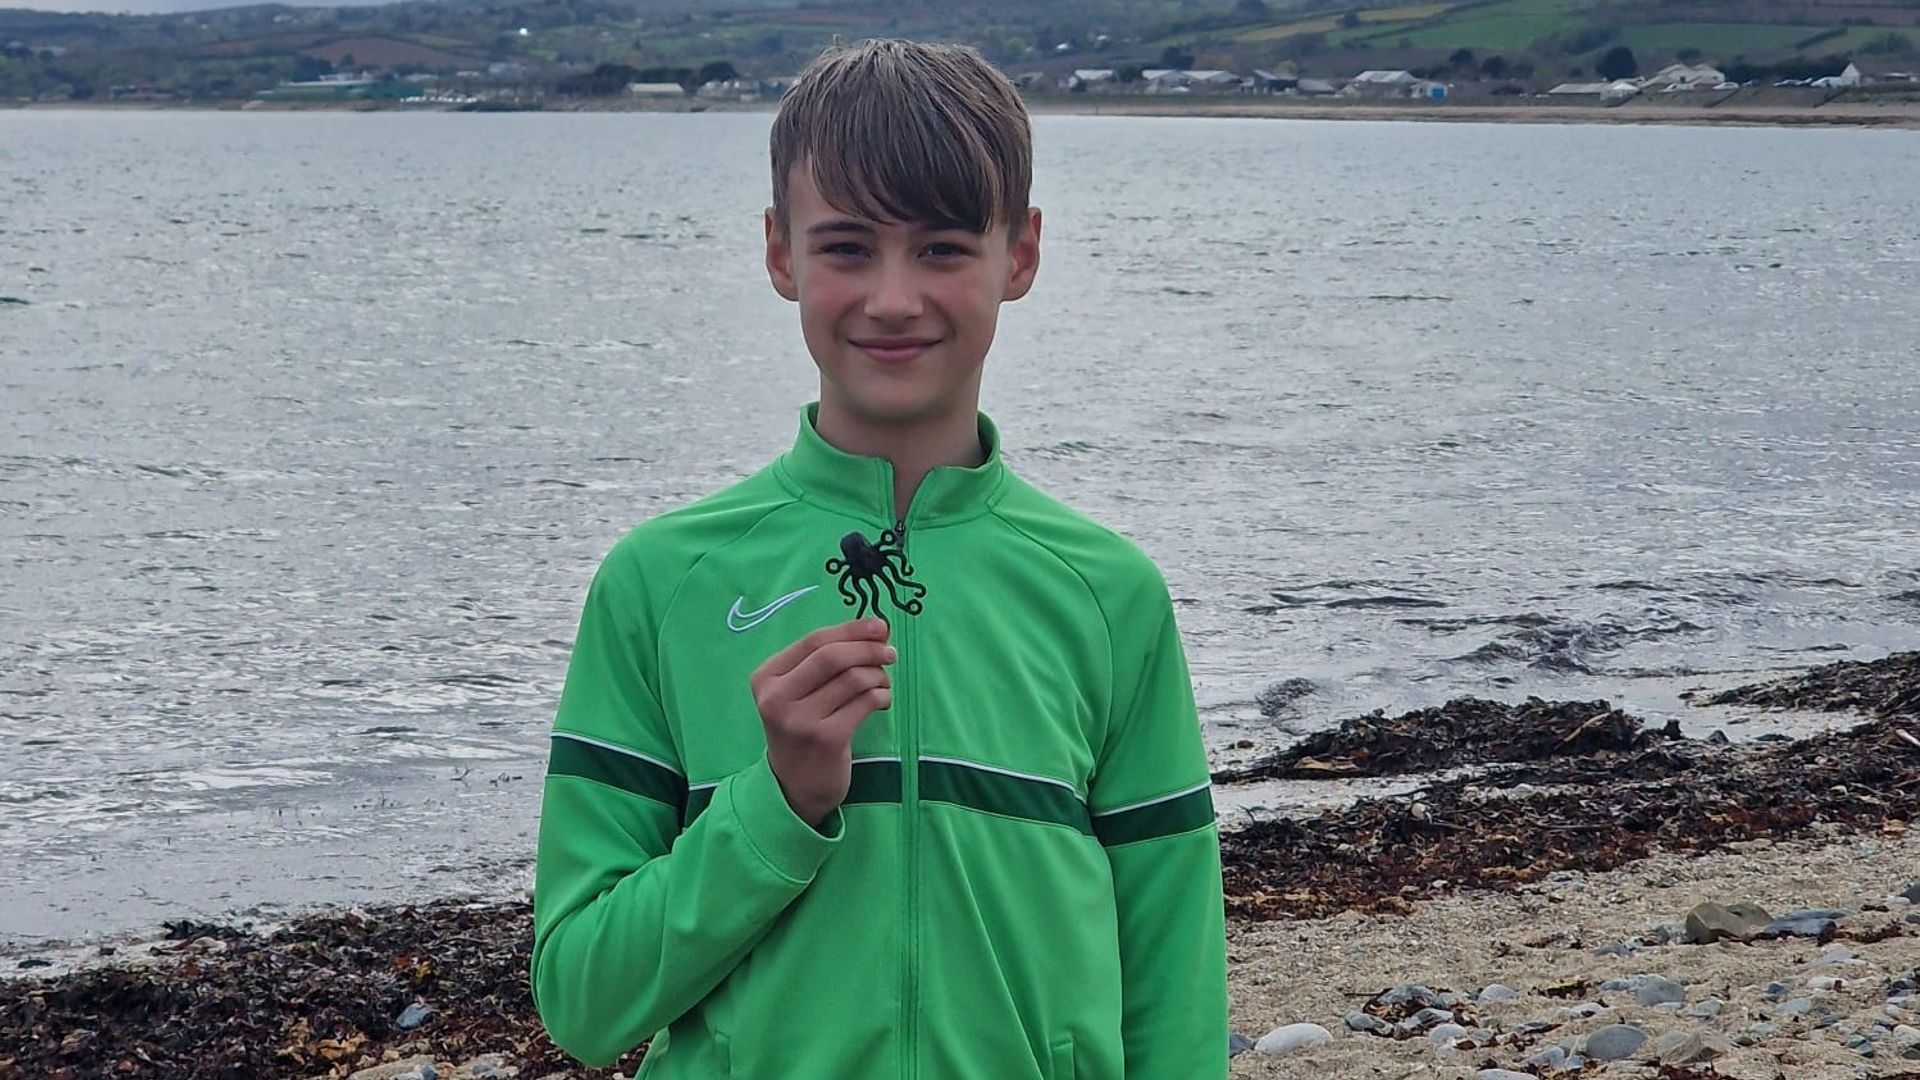 Boy, 13, finds 'holy grail' Lego octopus piece from sea spillage in 1997